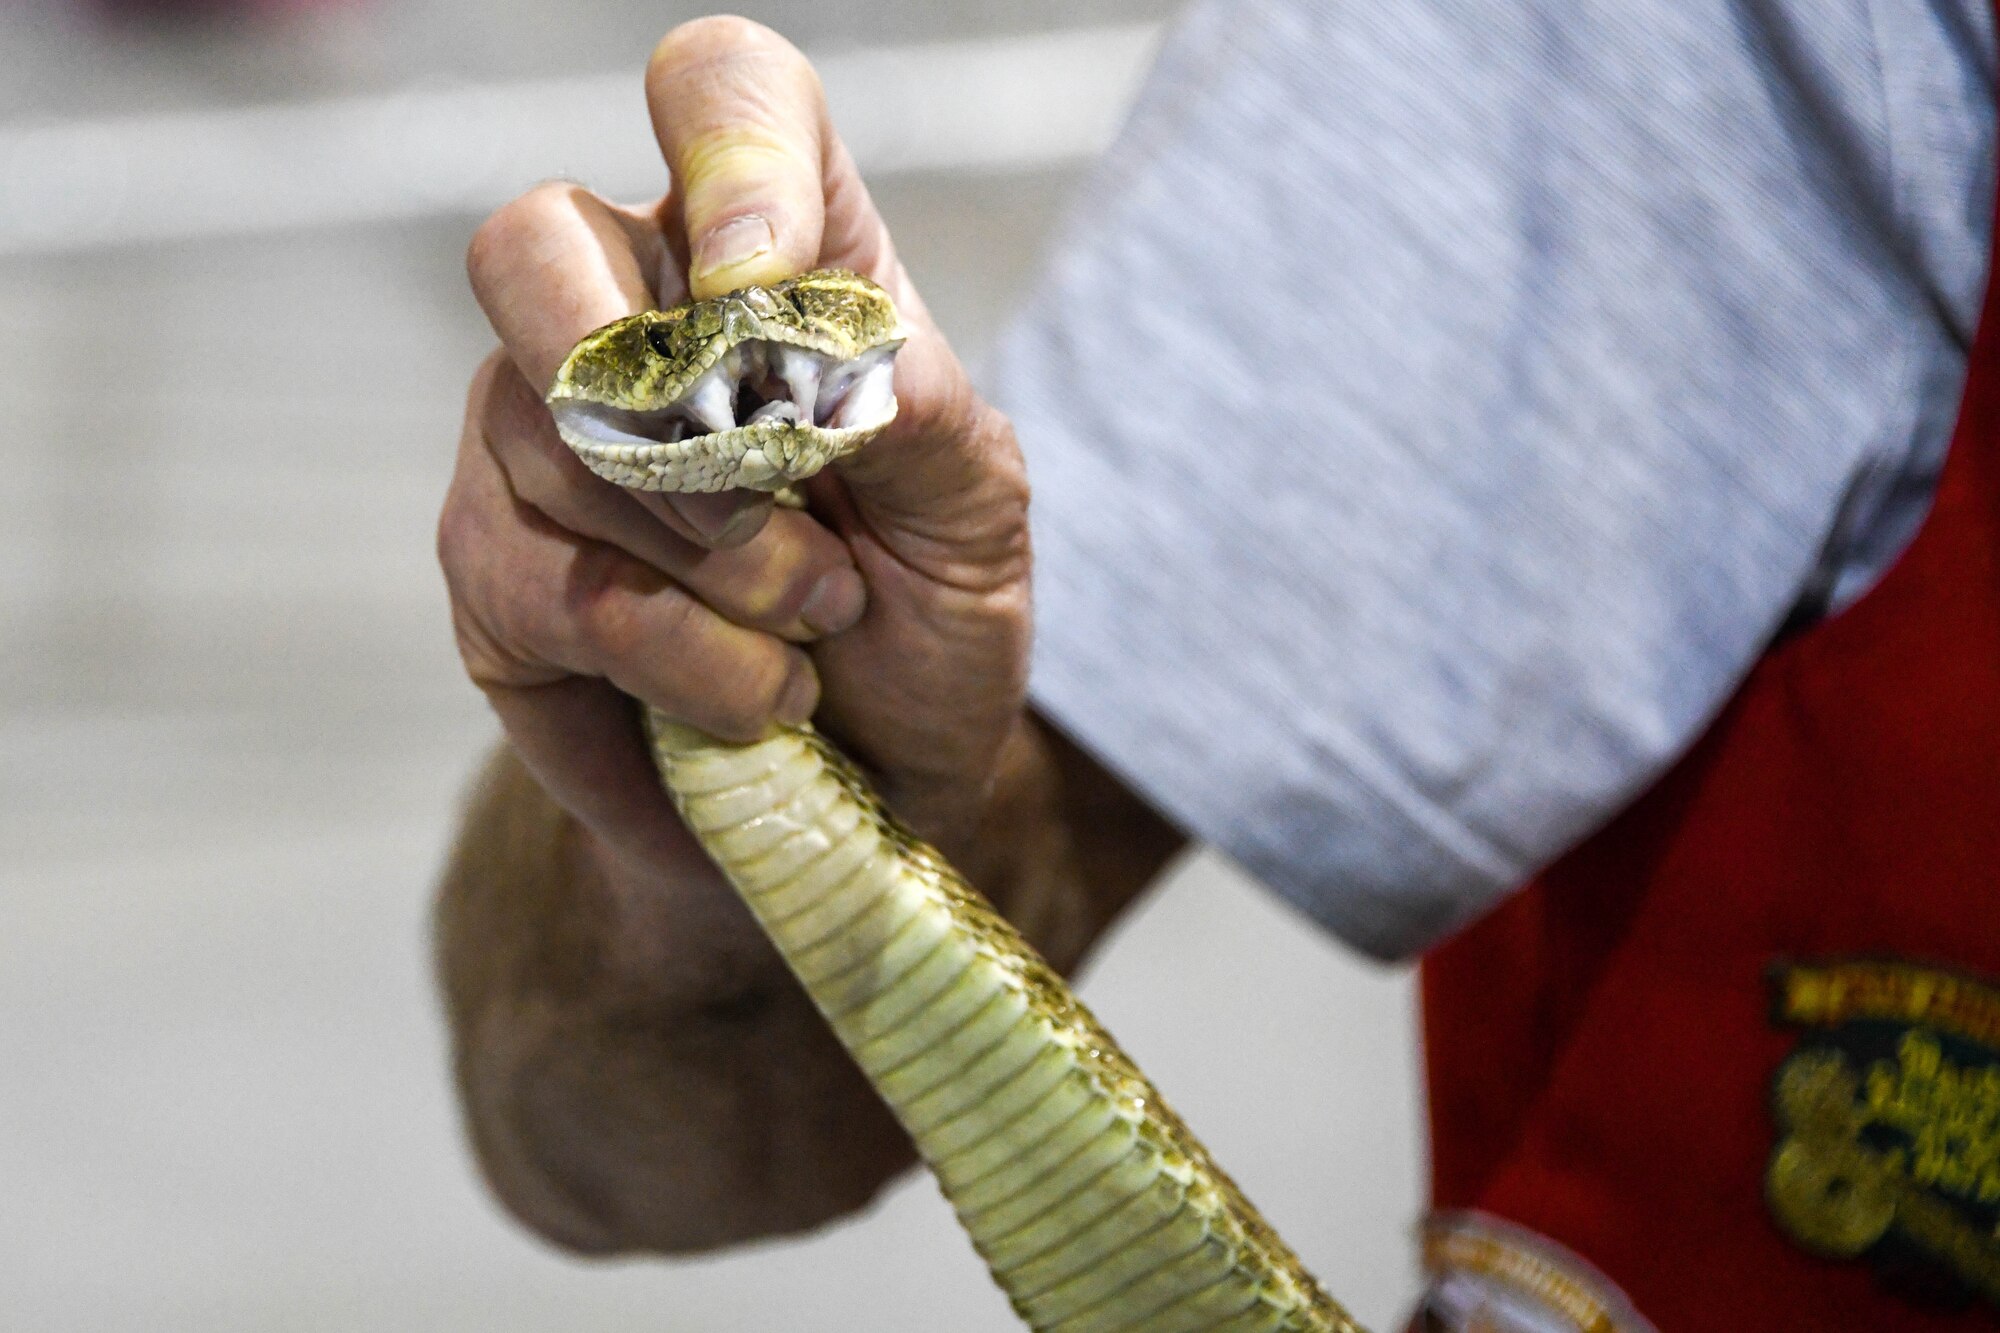 Mangum Rattlesnake Derby member holds up a rattlesnake at the Committee of 100 dinner event in Altus, Oklahoma, April 11, 2022. There are more than 24 rattlesnake species in the western hemisphere. (U.S. Air Force photo by Senior Airman Kayla Christenson)